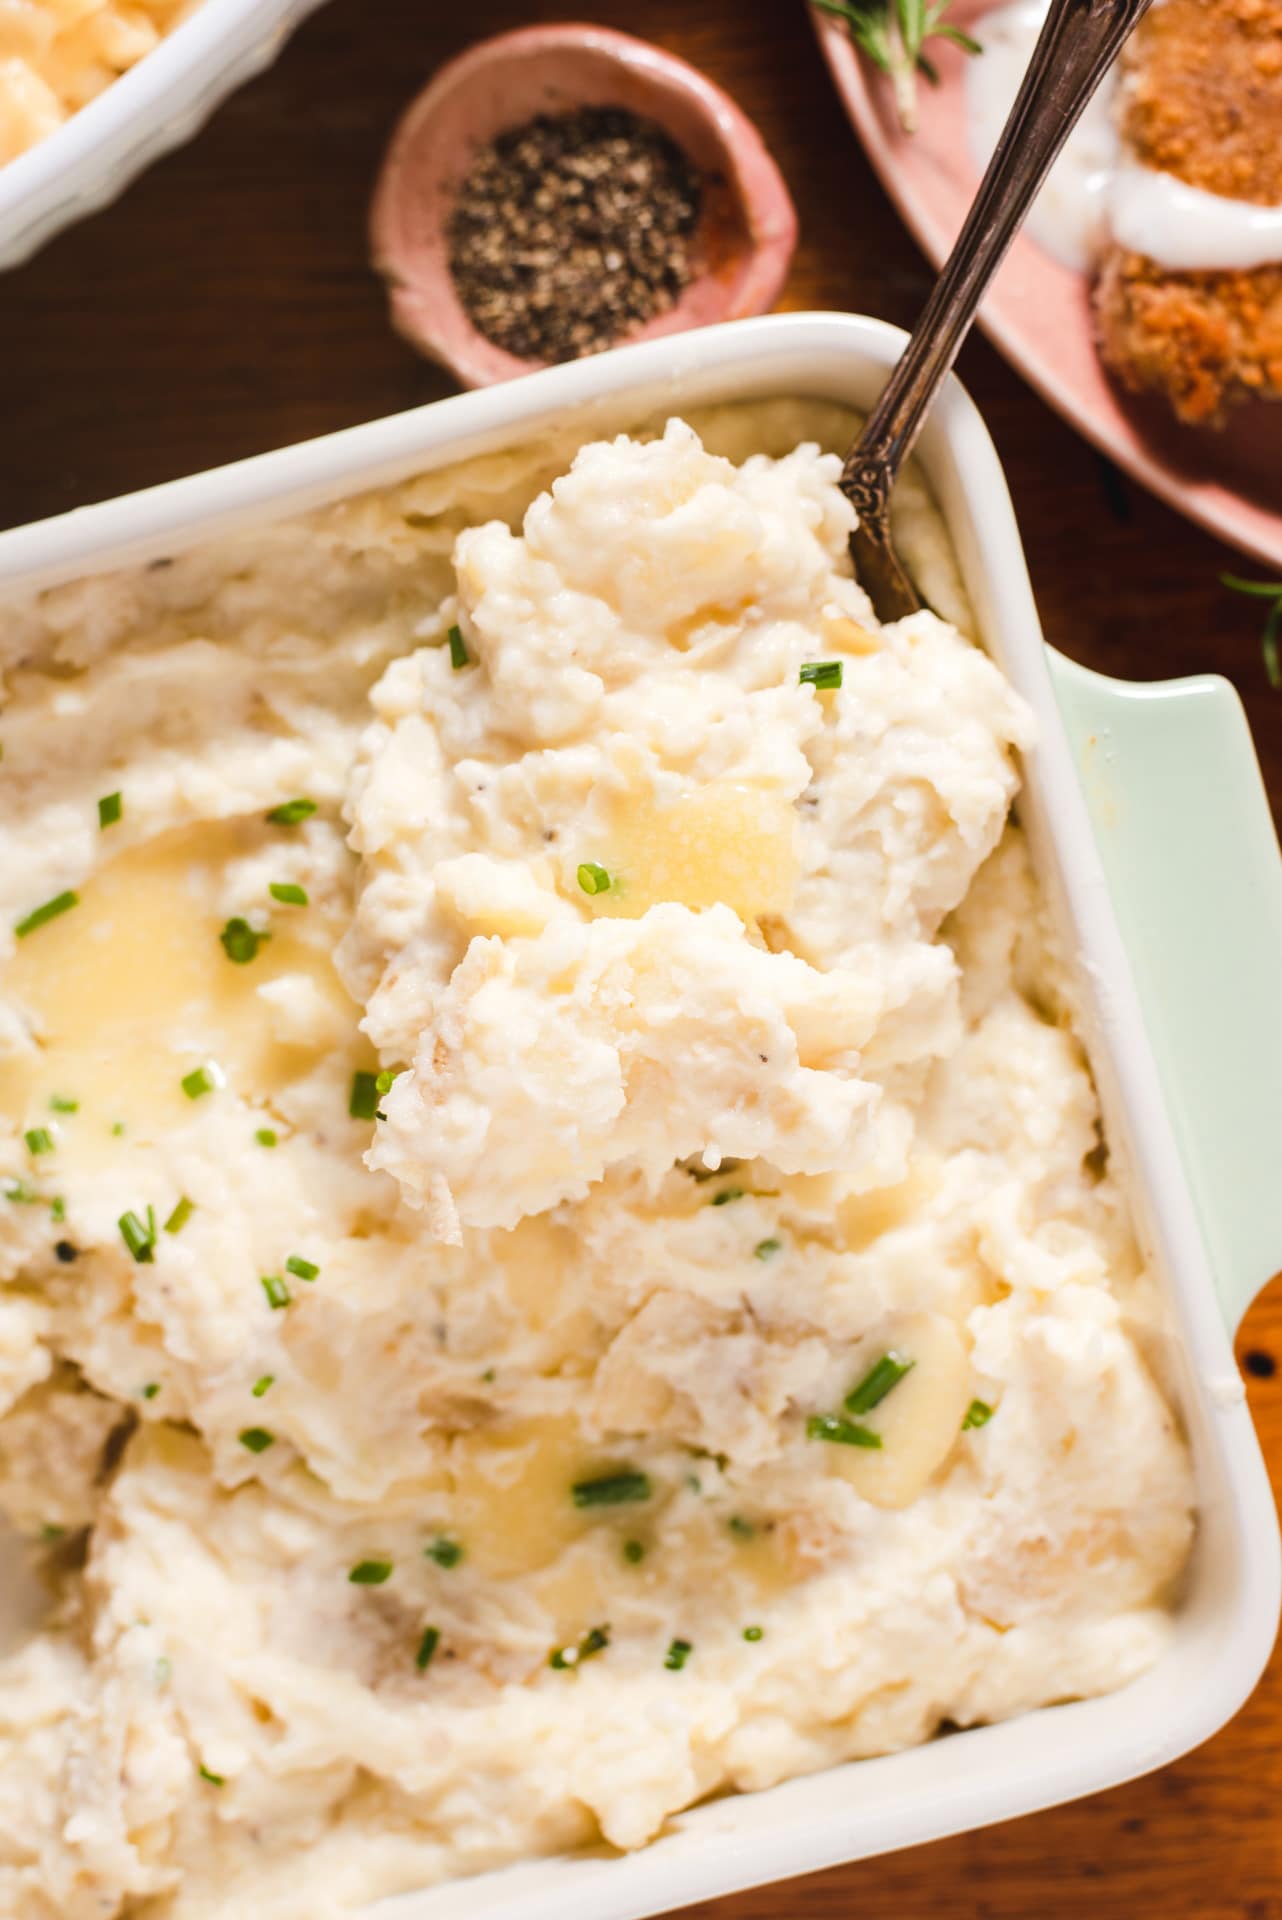 Mashed potatoes topped with butter and chives.